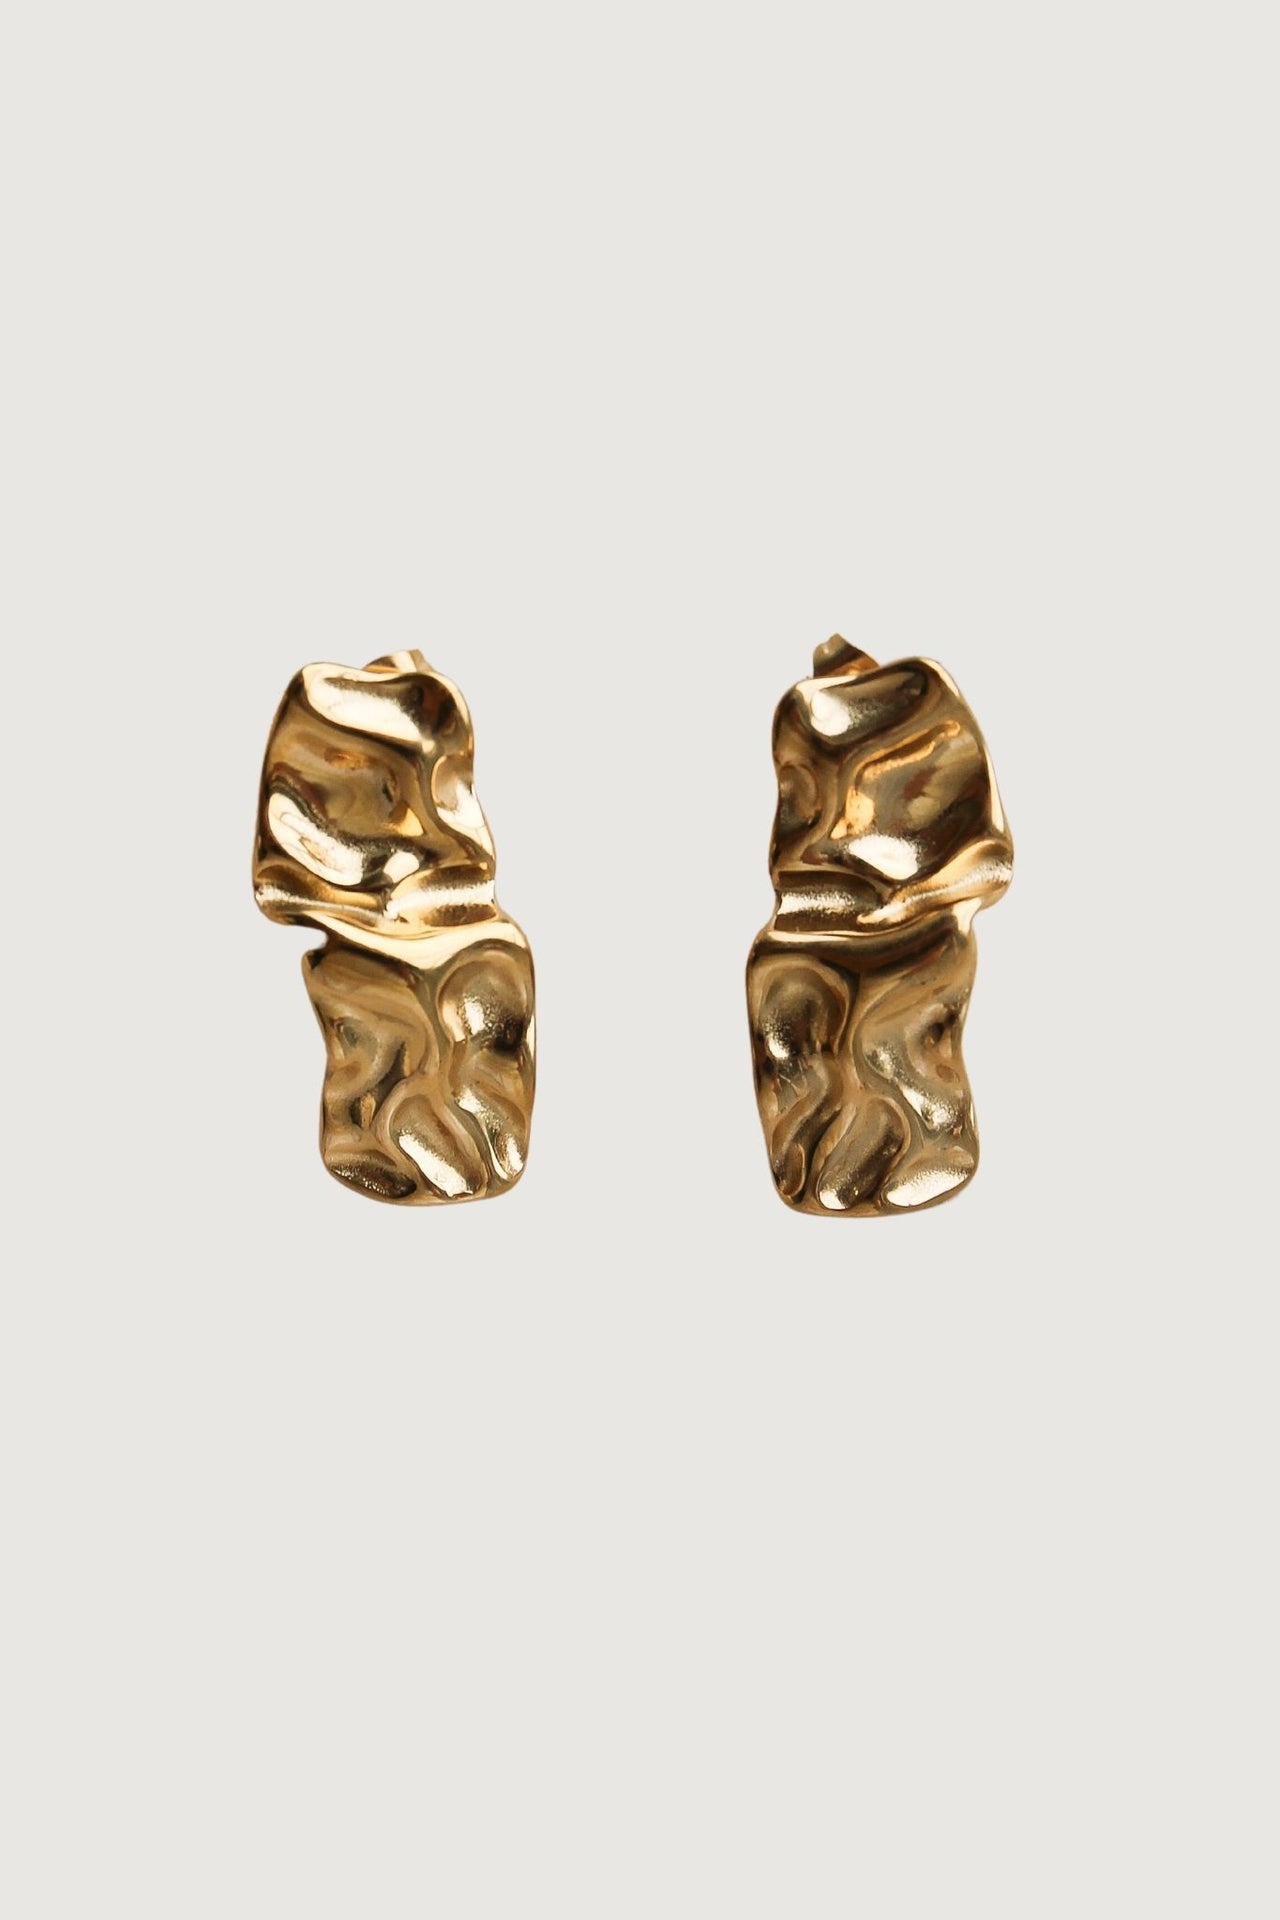 GOLD TEXTURED STUD EARRINGS